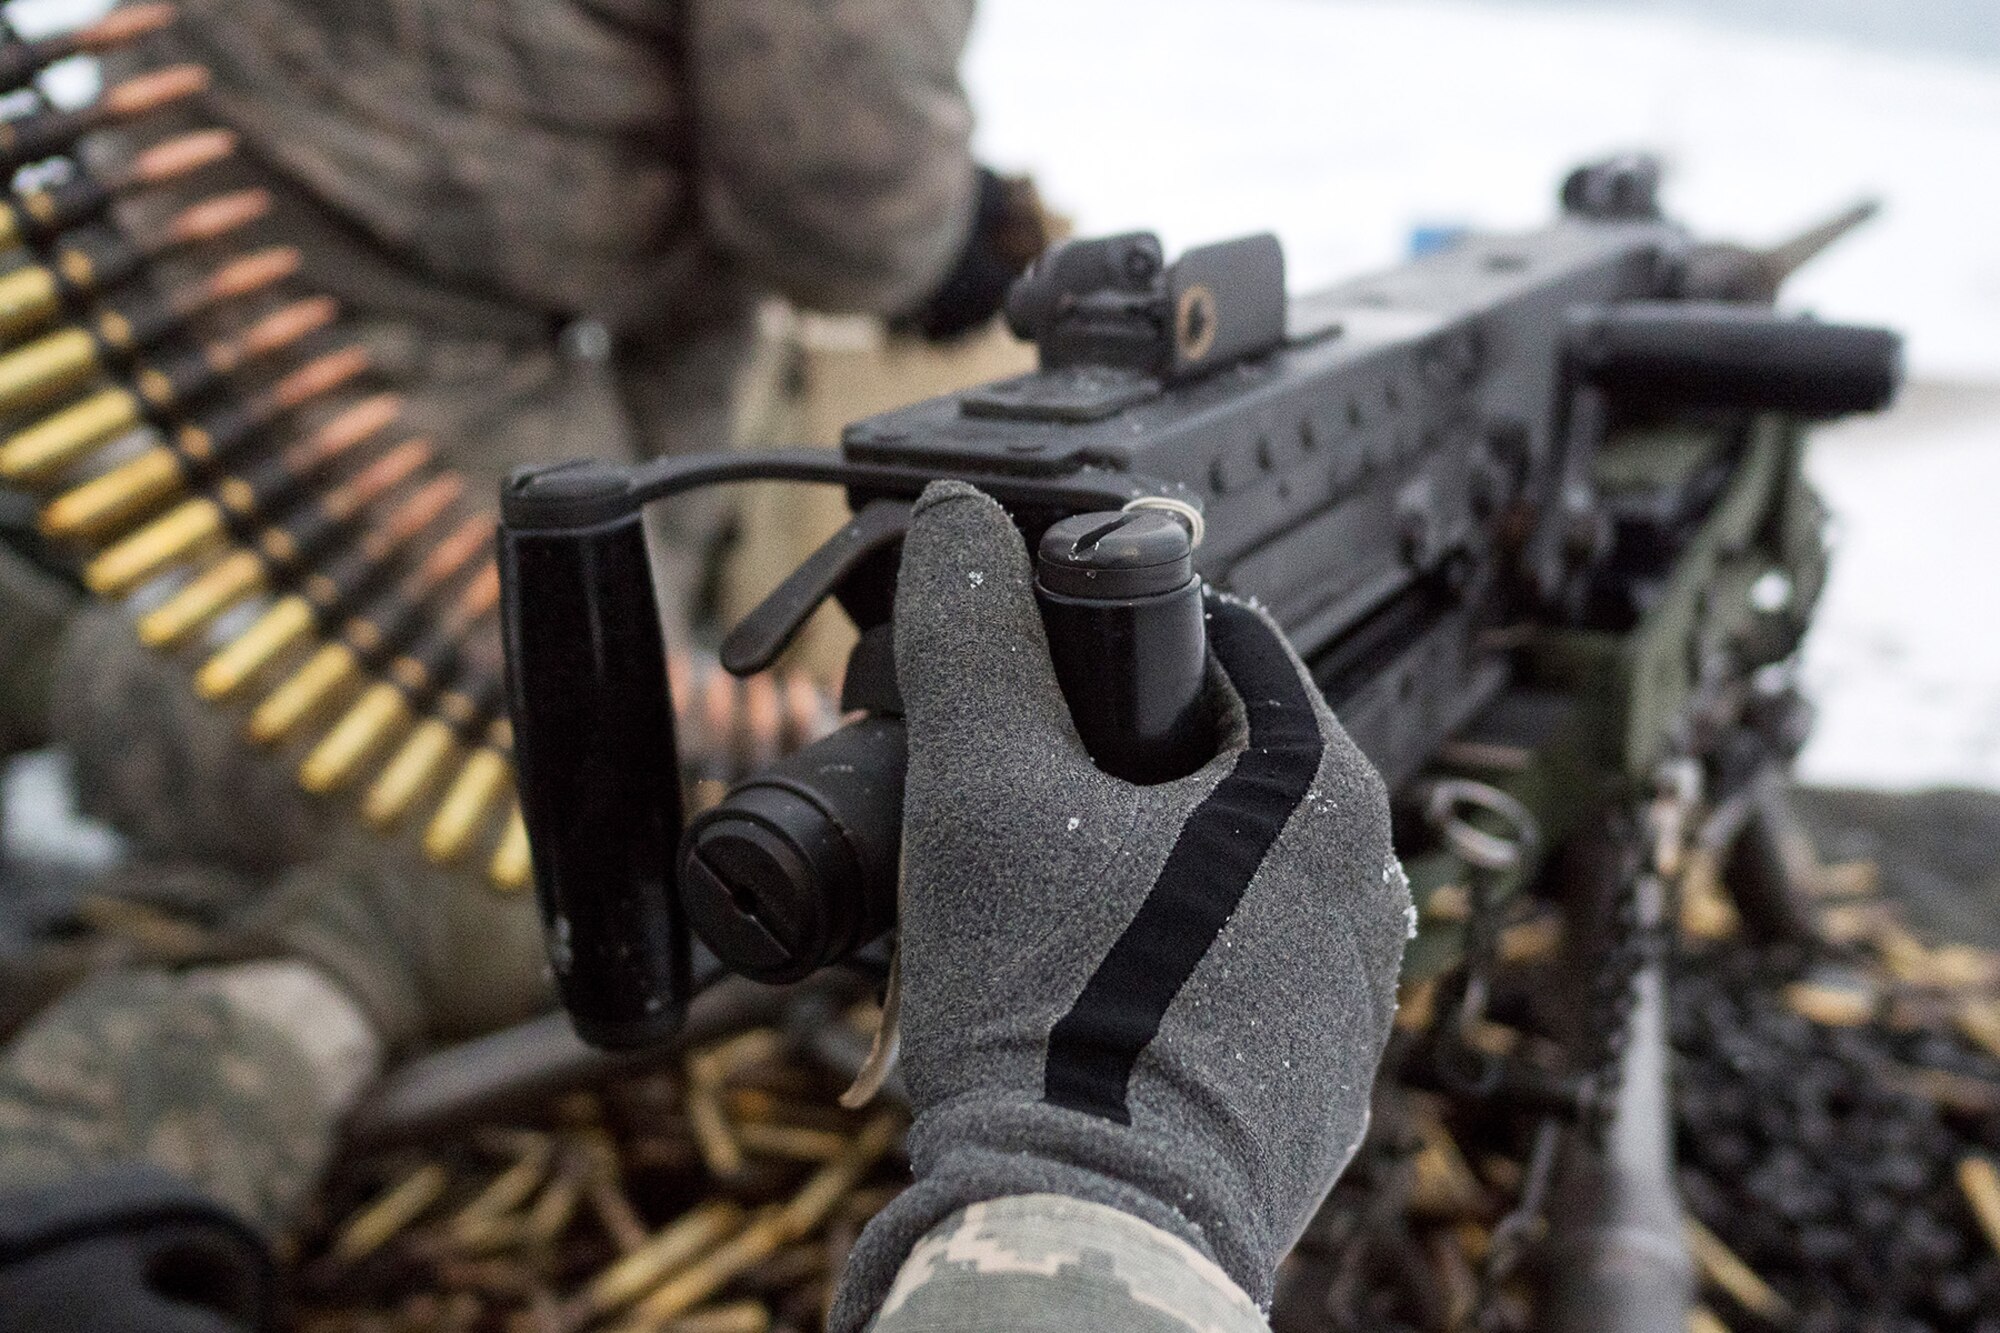 Airmen assigned to the 673d Security Forces Squadron load an M2 .50 Caliber machine gun during a qualification range on Joint Base Elmendorf-Richardson, Alaska, Jan. 10, 2018. Security Forces Airmen perform extensive training in law enforcement as well as combat tactics to protect U.S. Military bases and assets both stateside and overseas.